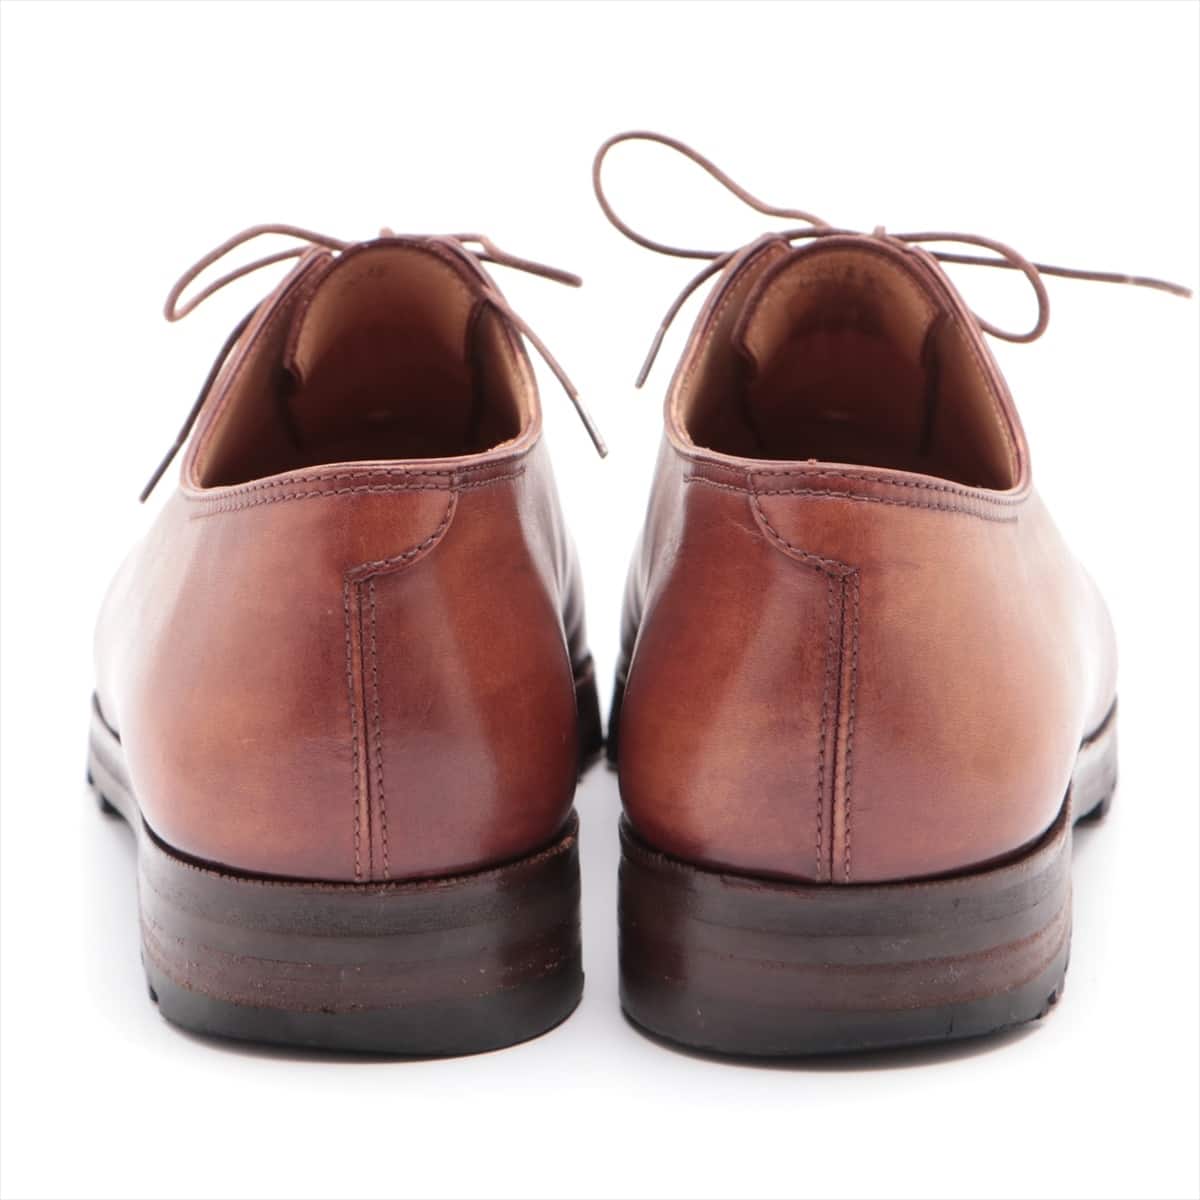 Berluti Leather Leather shoes 9.5 Men's Brown With genuine shoe tree